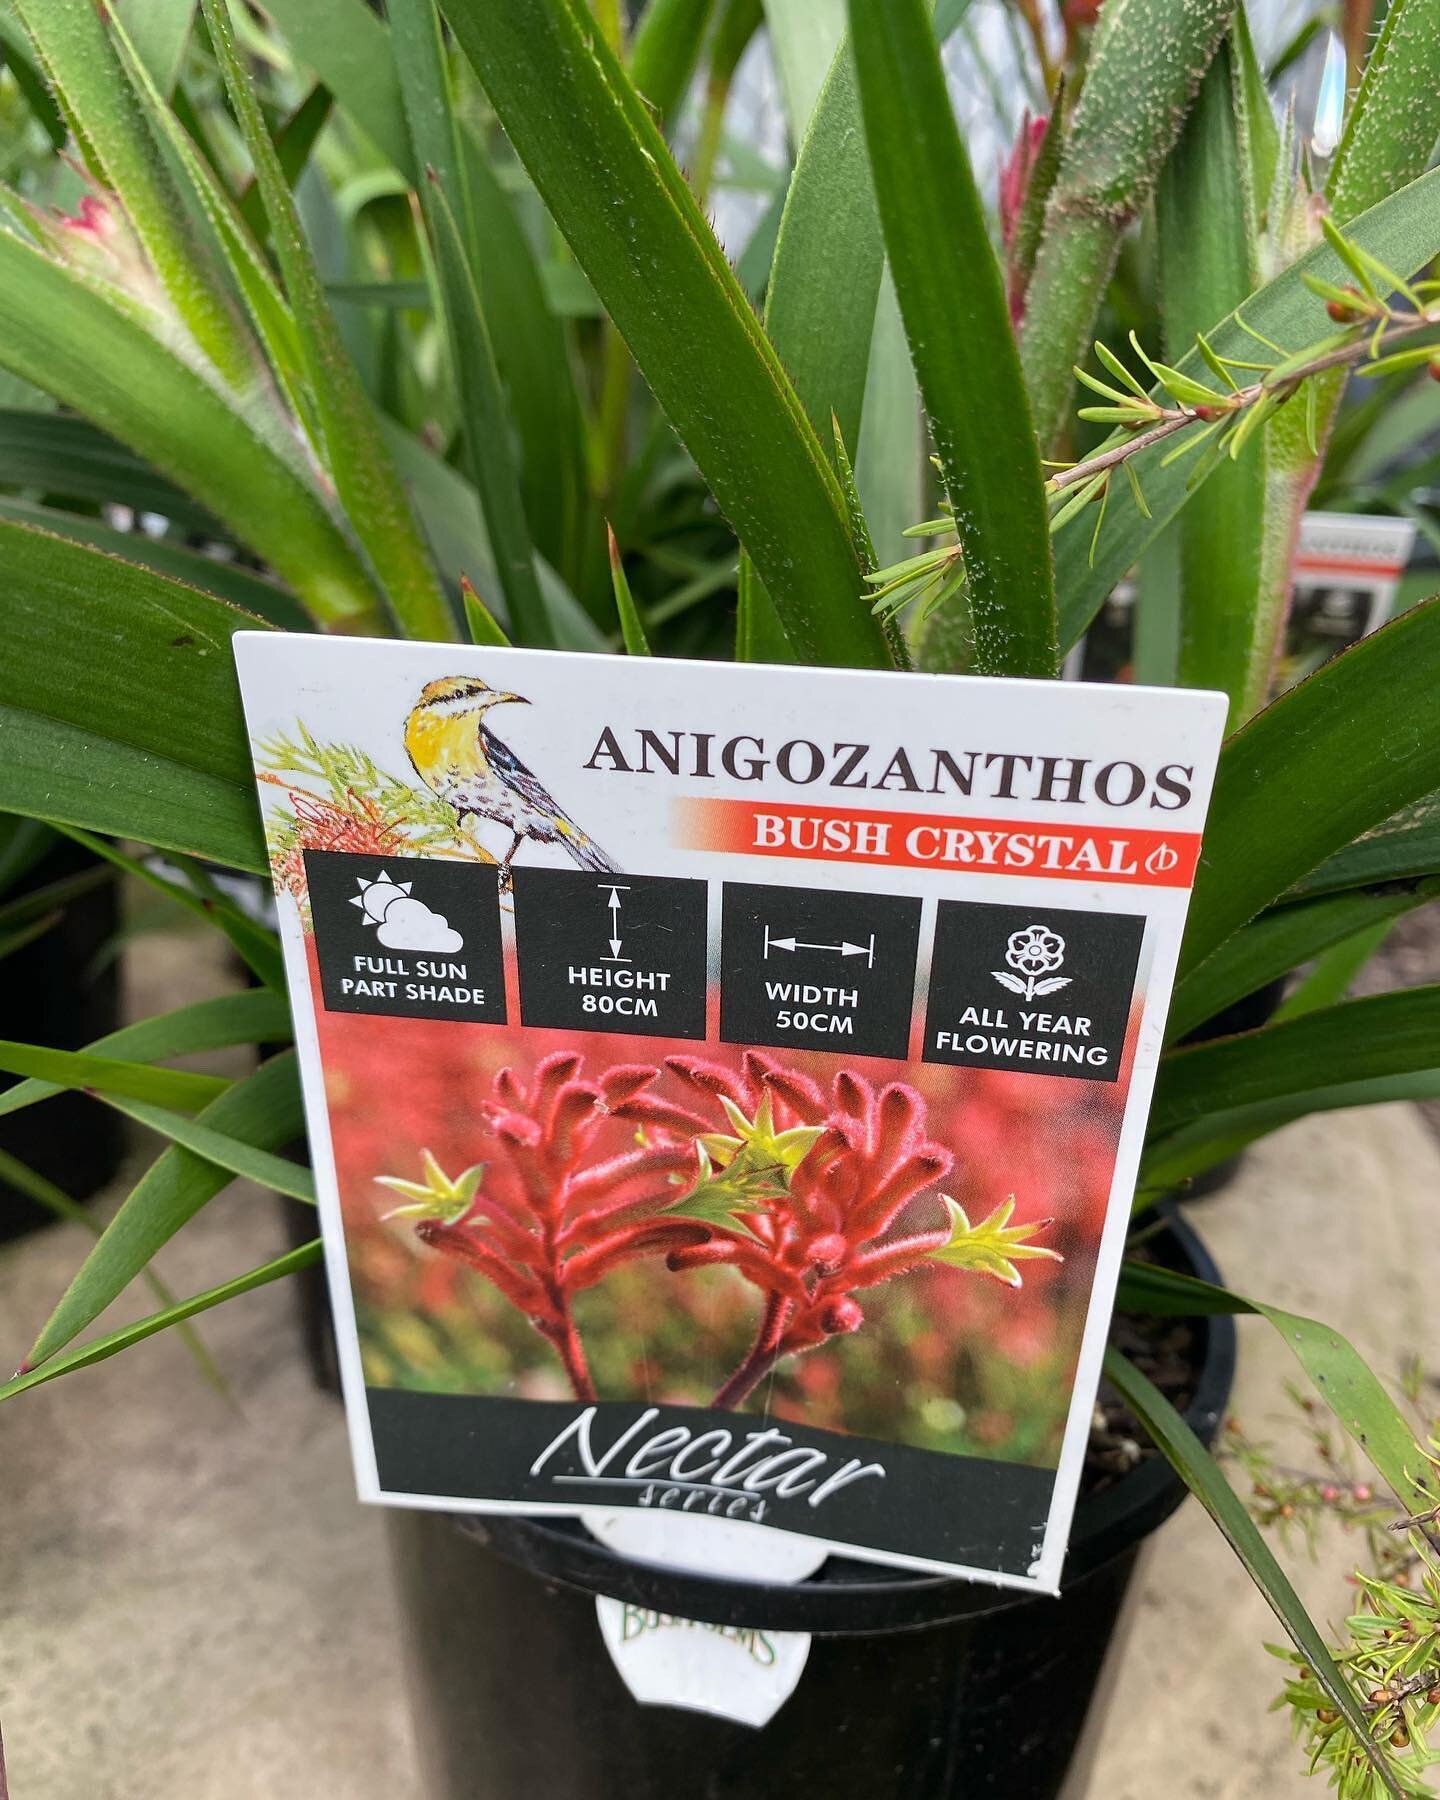 More native plants suitable for cut flowers. #nativecutflowers #dungognursery #countryelegancegardensgifts